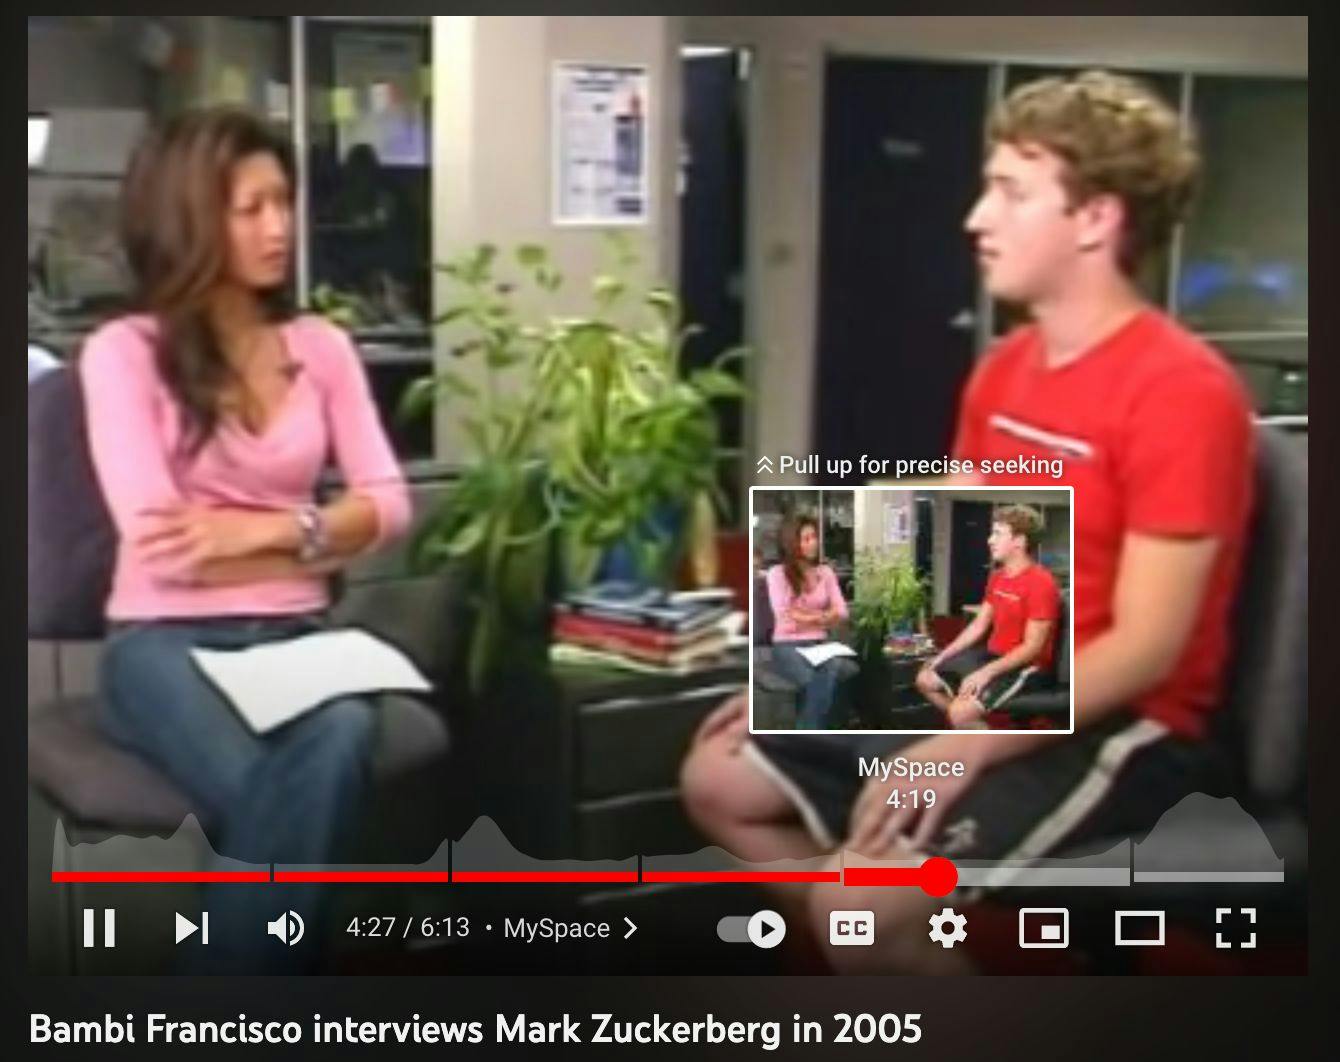 featured image - Mark Zuckerberg Wears "My Mom Thinks I'm Cool" Tshirt & Mesh Shorts in 2005 The Facebook Interview 